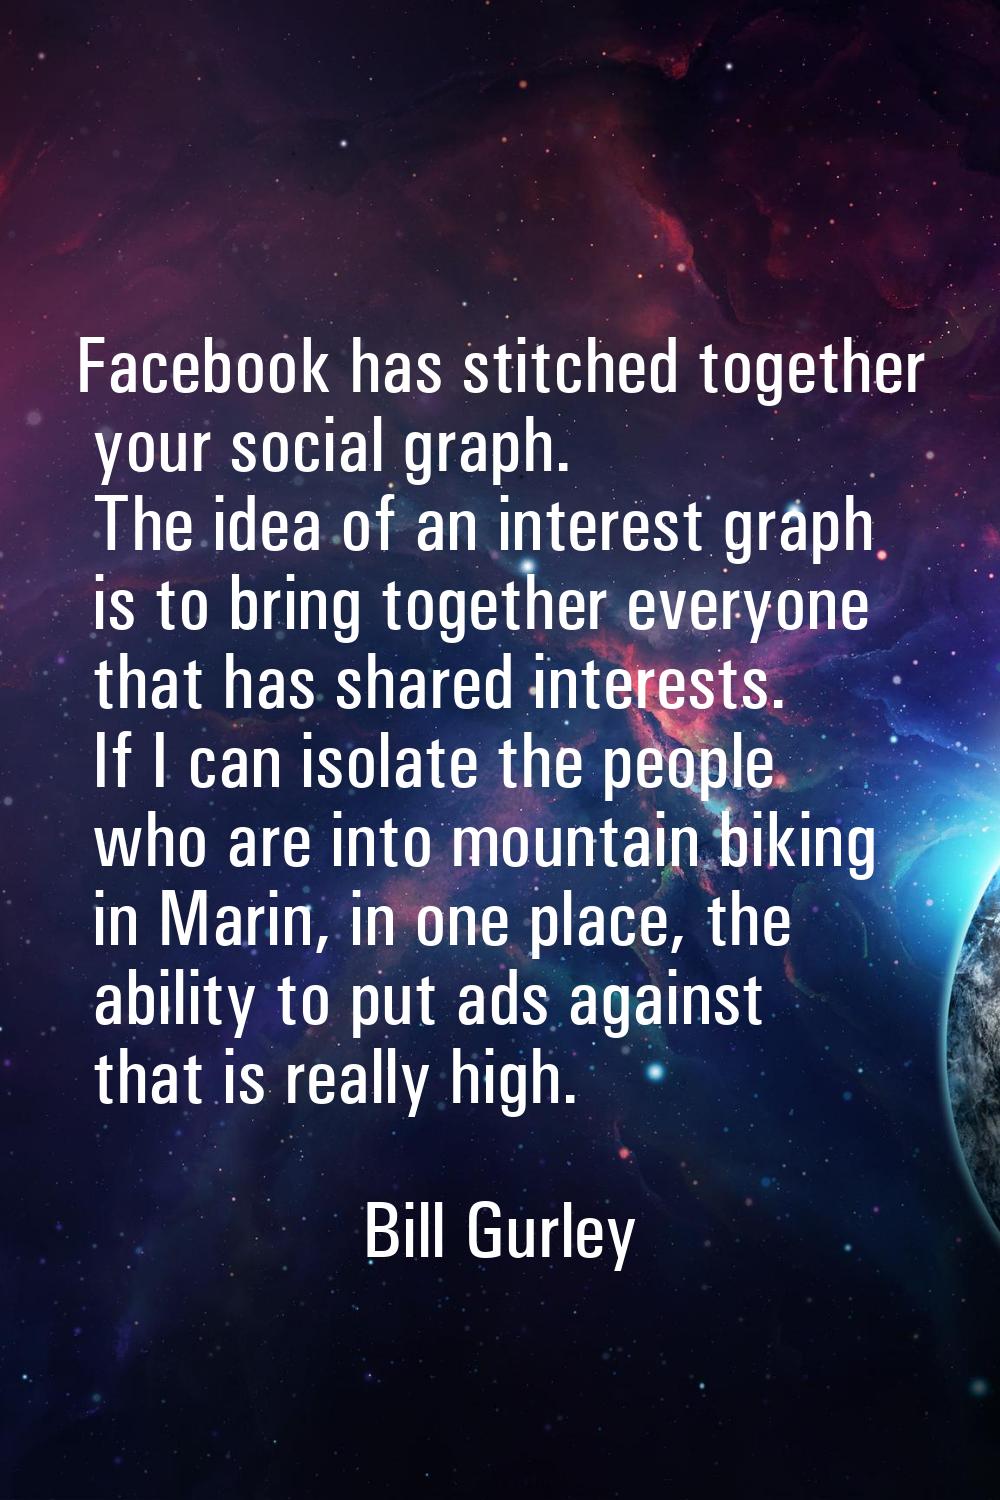 Facebook has stitched together your social graph. The idea of an interest graph is to bring togethe